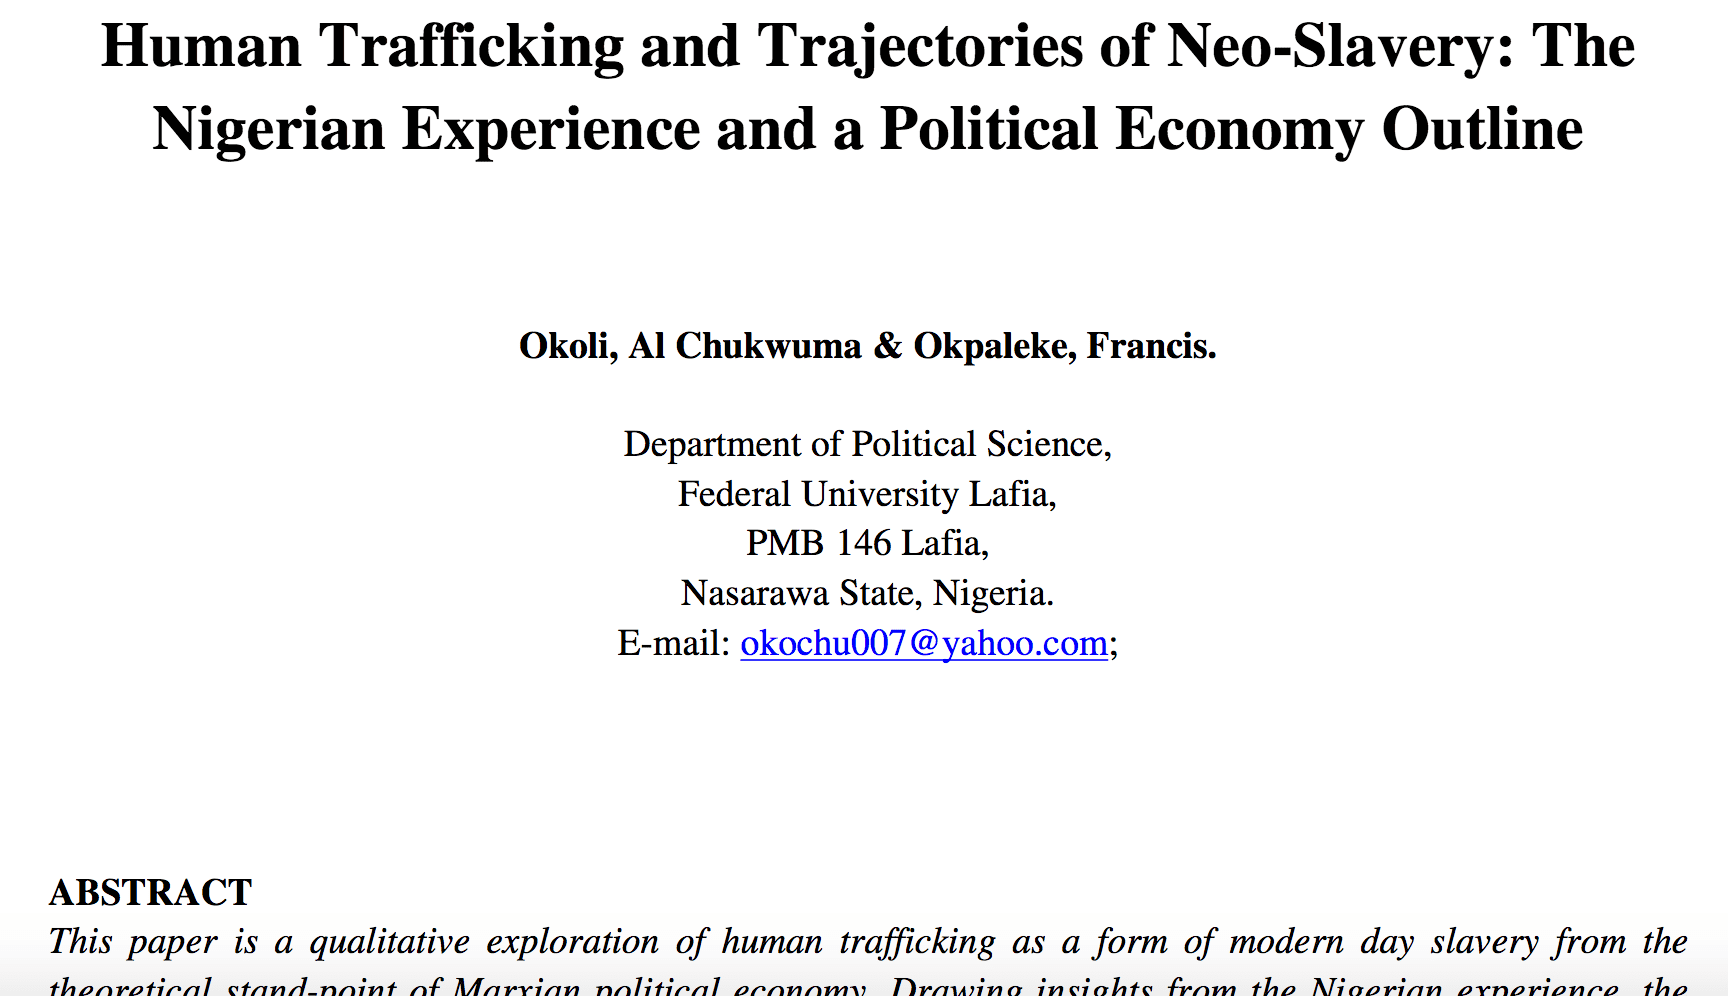 Human trafficking and trajectories of neo-slavery: the Nigerian experience and a political economy outline